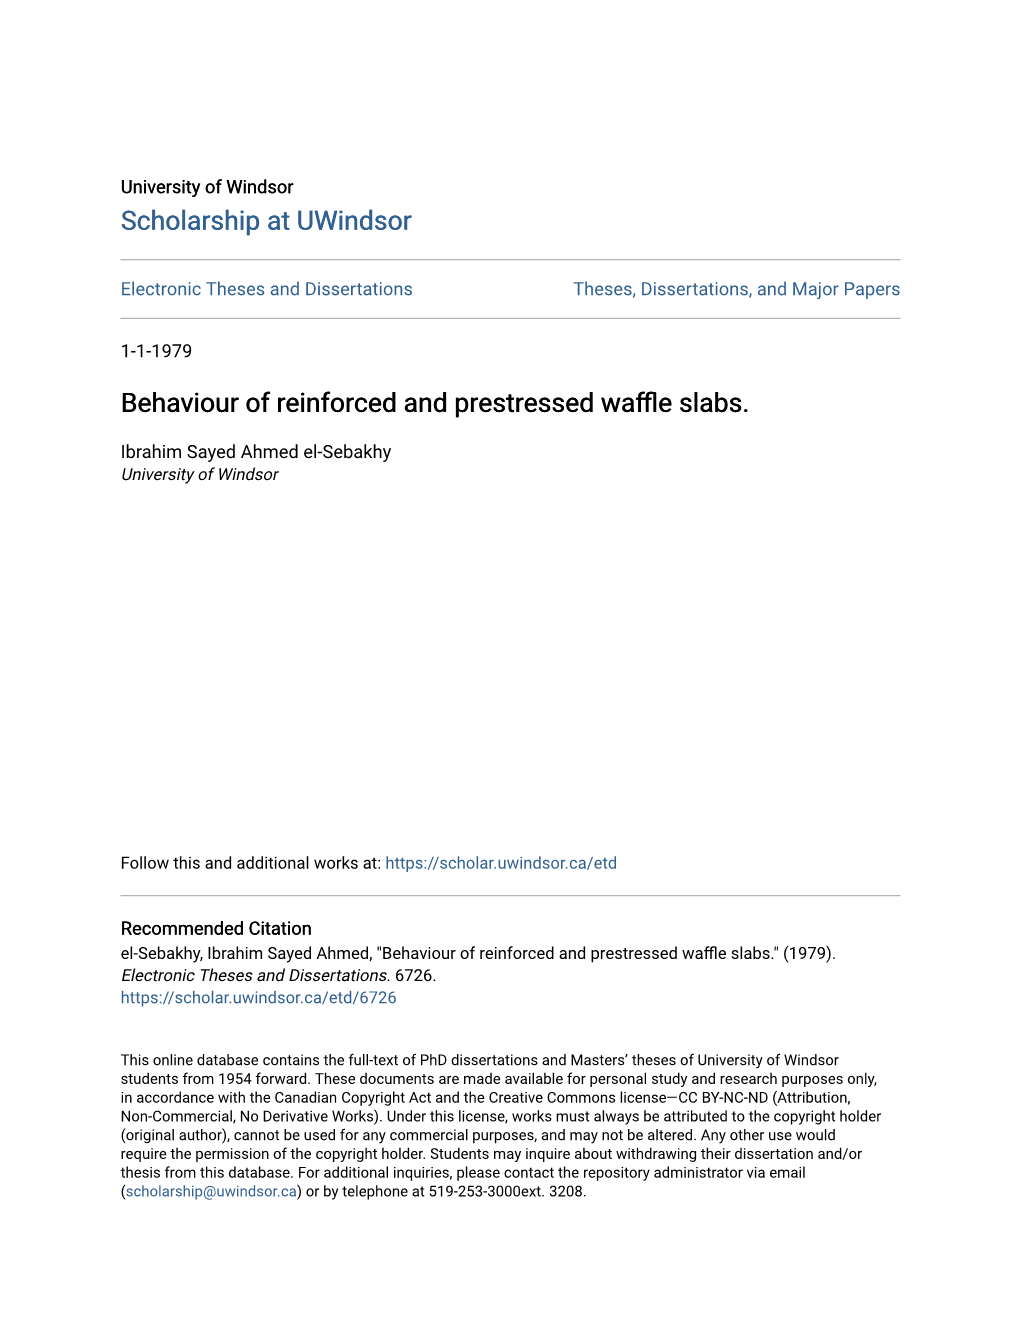 Behaviour of Reinforced and Prestressed Waffle Slabs